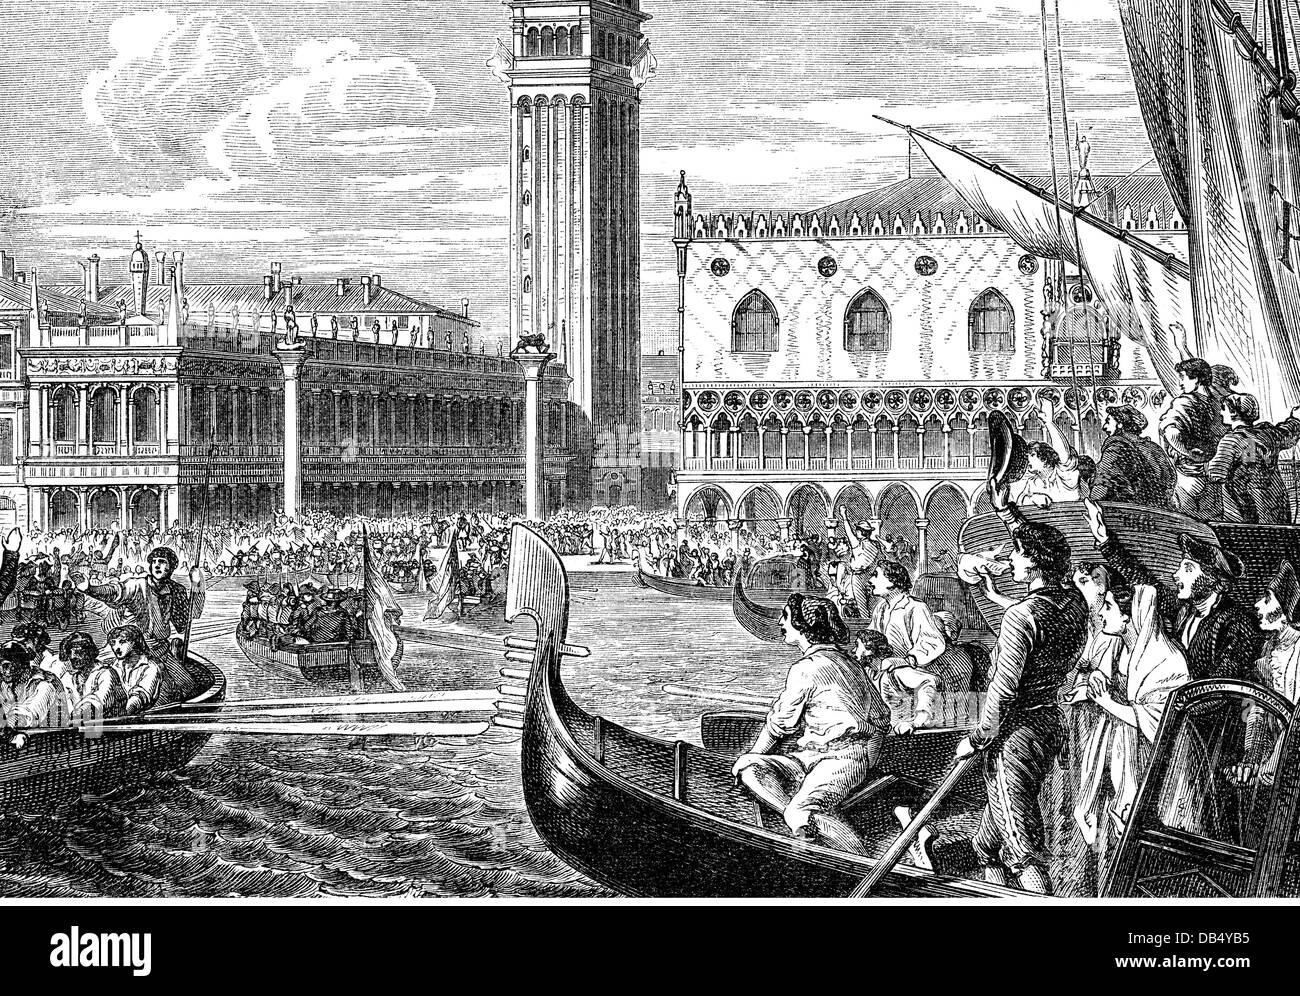 politics, Italy, entry Italian troops under Viceroy Eugene de Beauharnais in Venice, January 1806, Additional-Rights-Clearences-Not Available Stock Photo